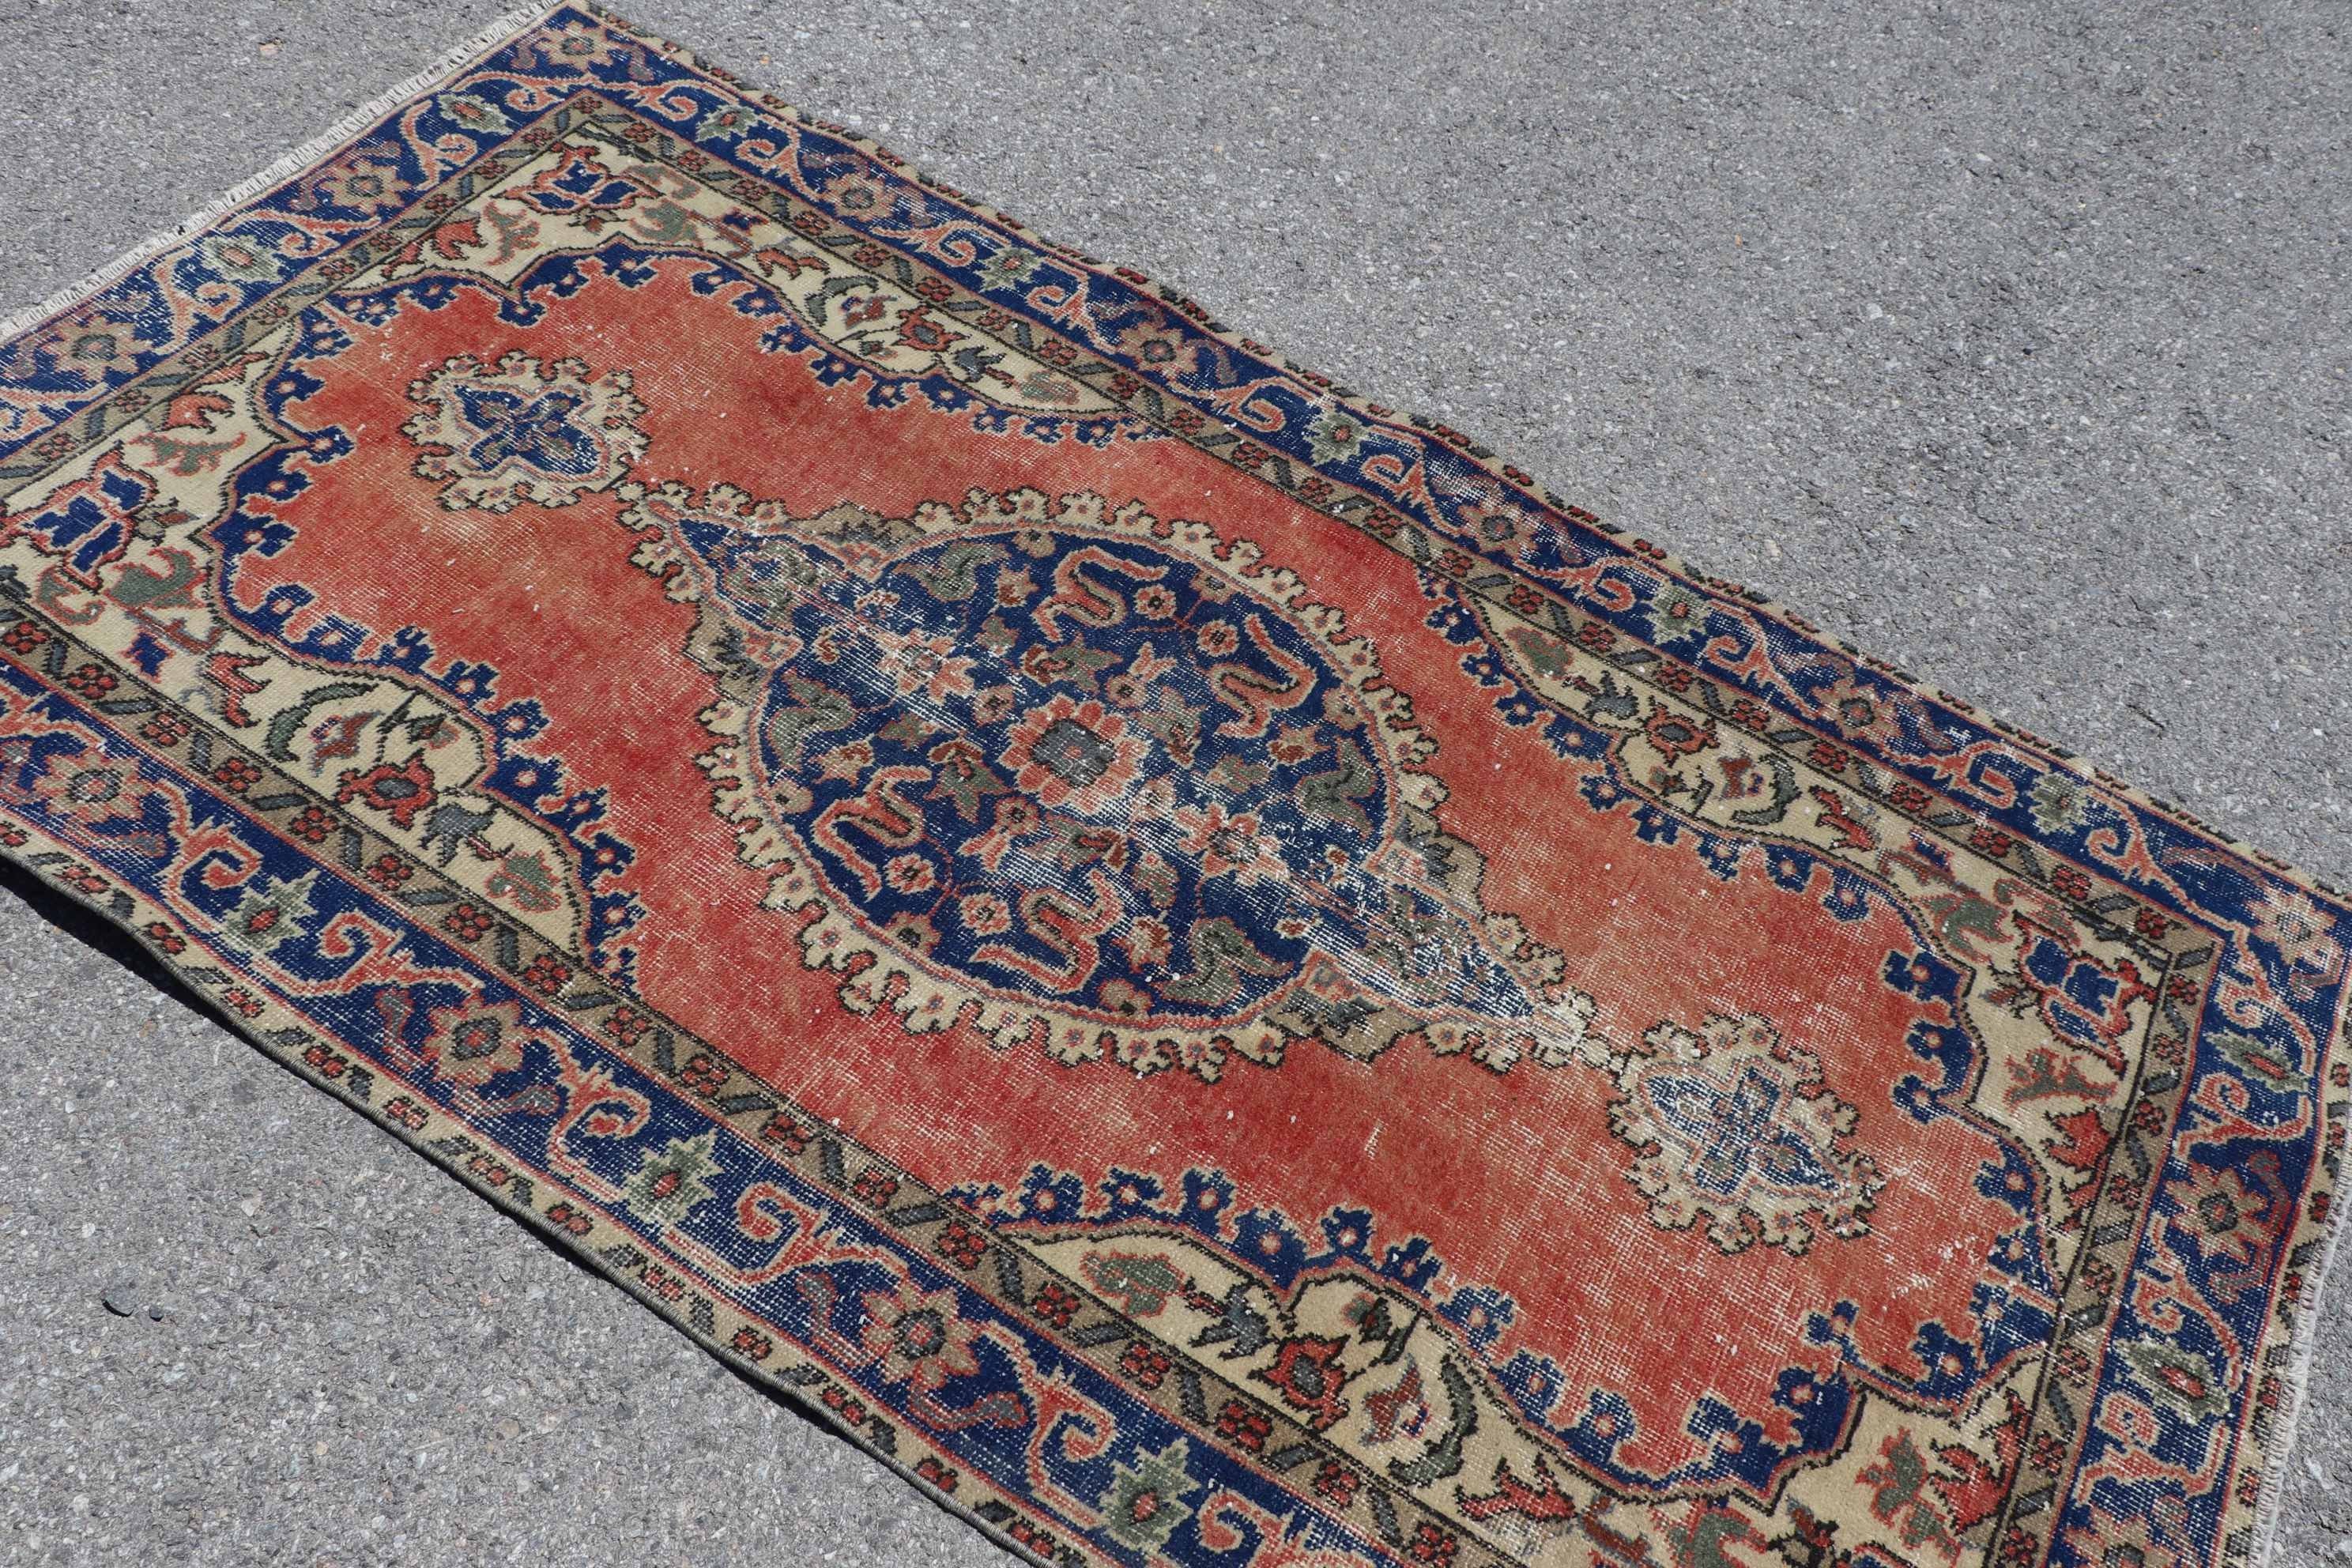 Vintage Rugs, Entry Rug, Red Home Decor Rugs, Rugs for Kitchen, Antique Rug, 3.5x6.7 ft Accent Rug, Nursery Rugs, Turkish Rugs, Cool Rug